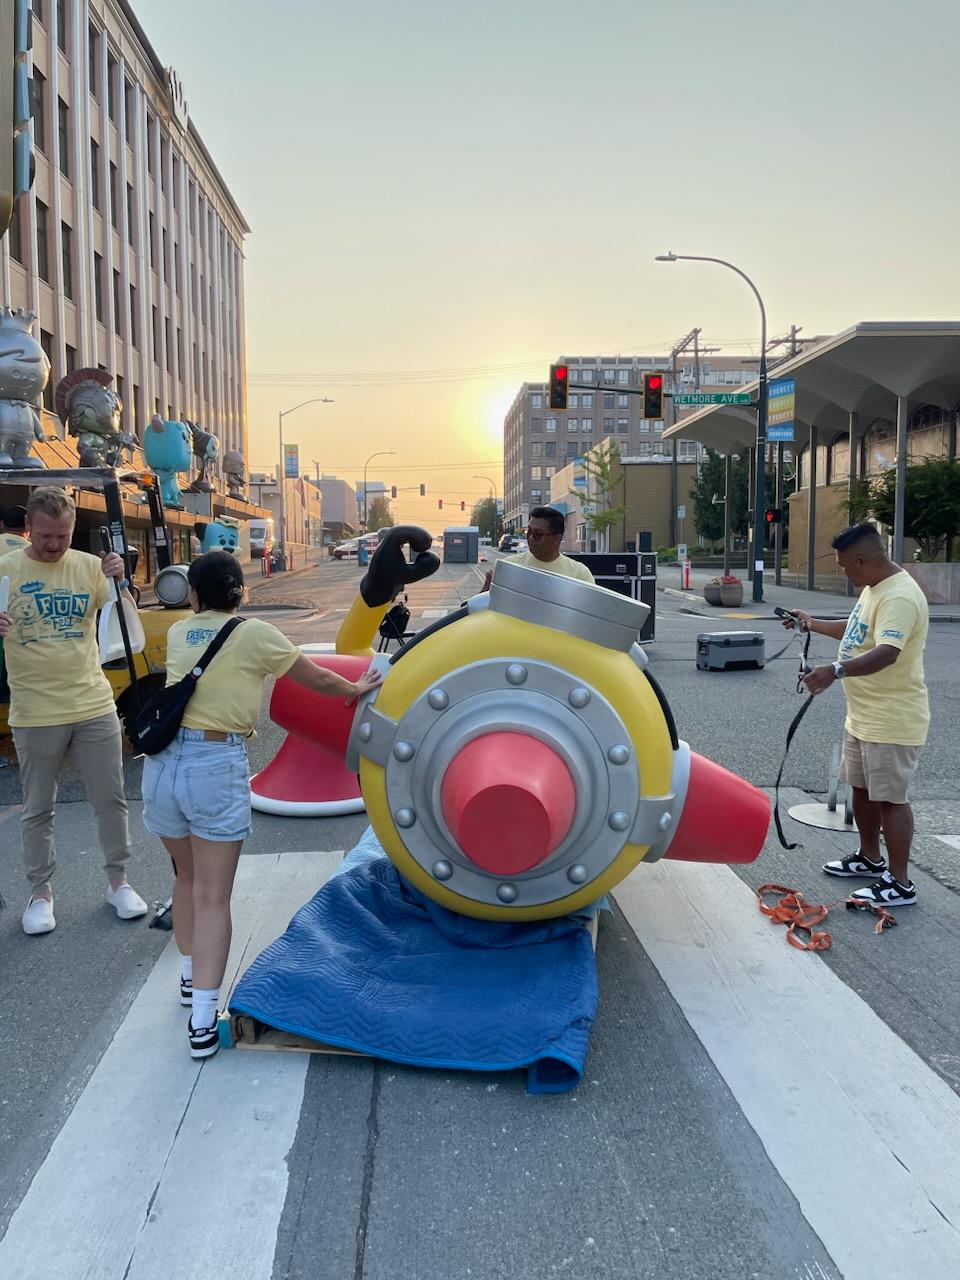 Minion Statue: Funko volunteers in yellow Fun Fest 2023 tee shirts help place a Minion statue out in the street.